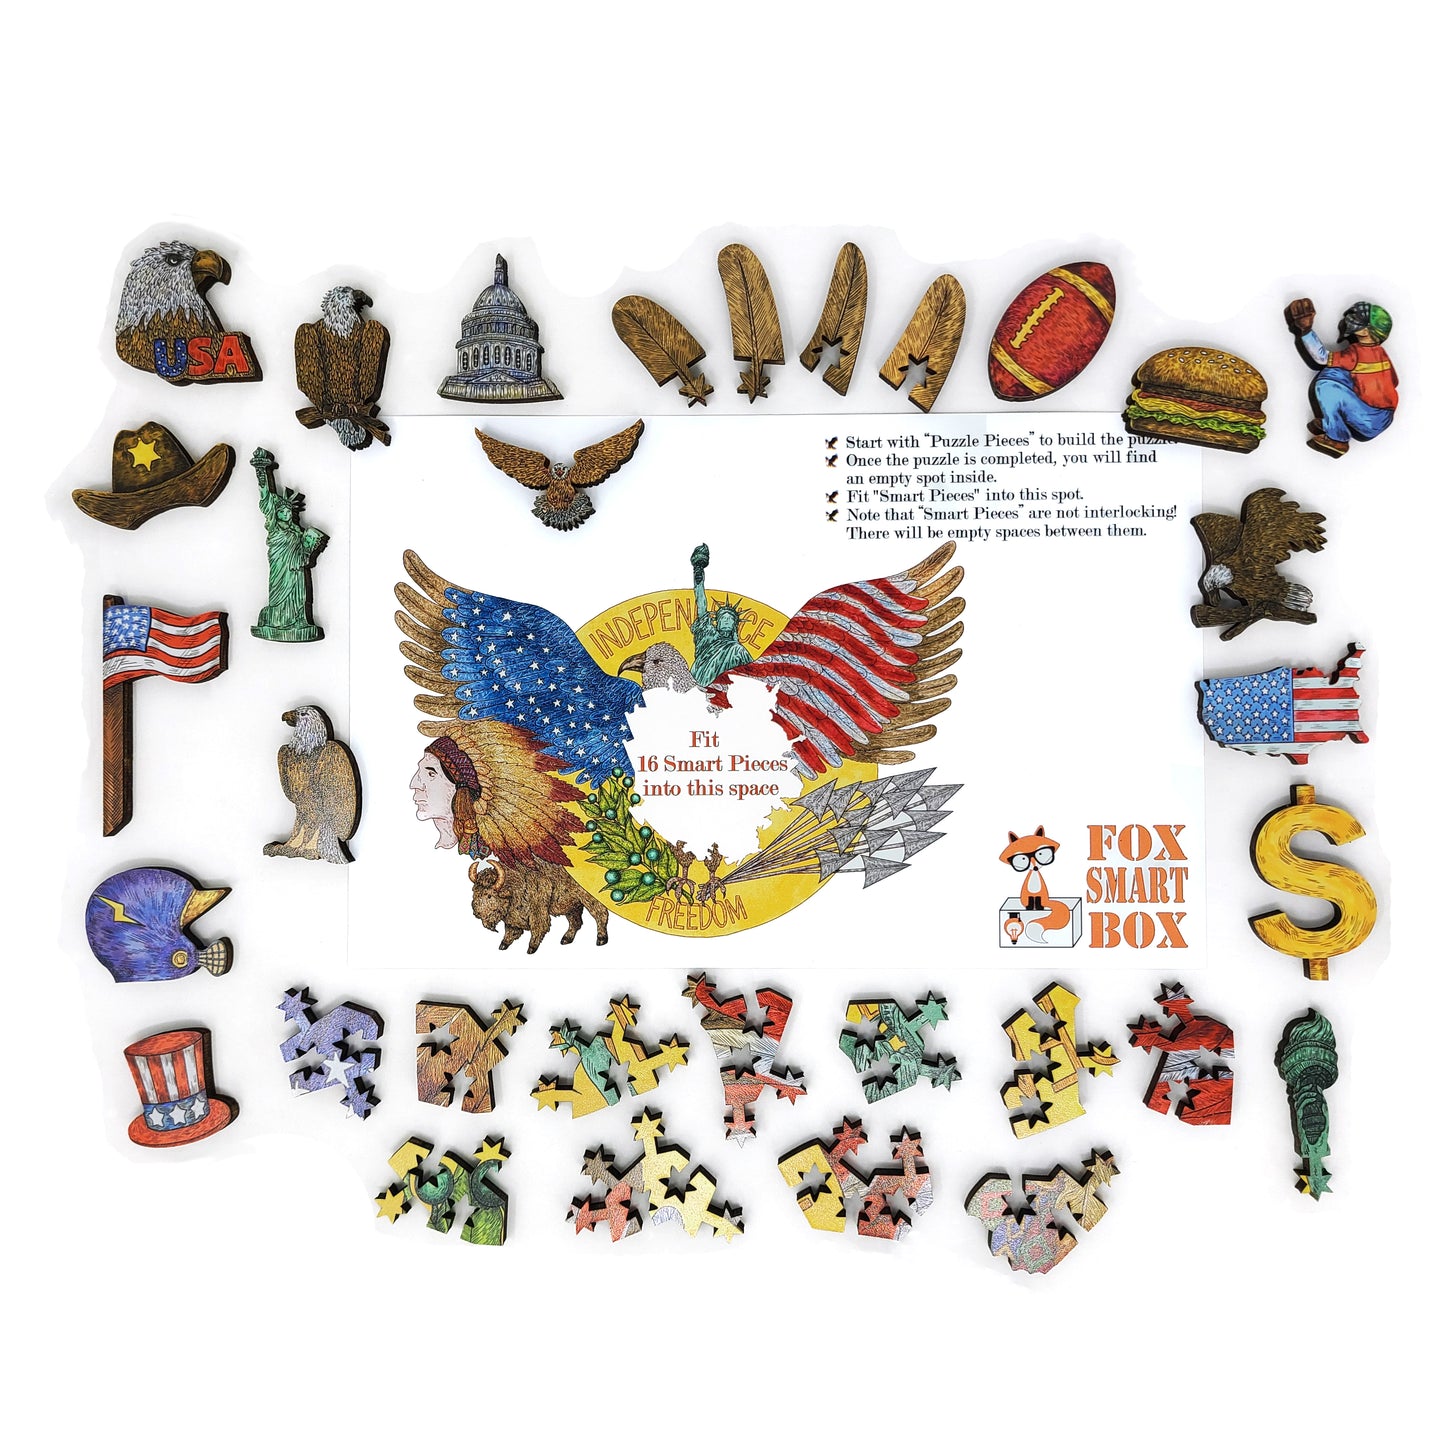 Wooden Jigsaw Puzzle for Adults - Smart Puzzle with Smart Pieces - 222 Puzzle Pieces + 16 Smart Pieces - Wings of Freedom